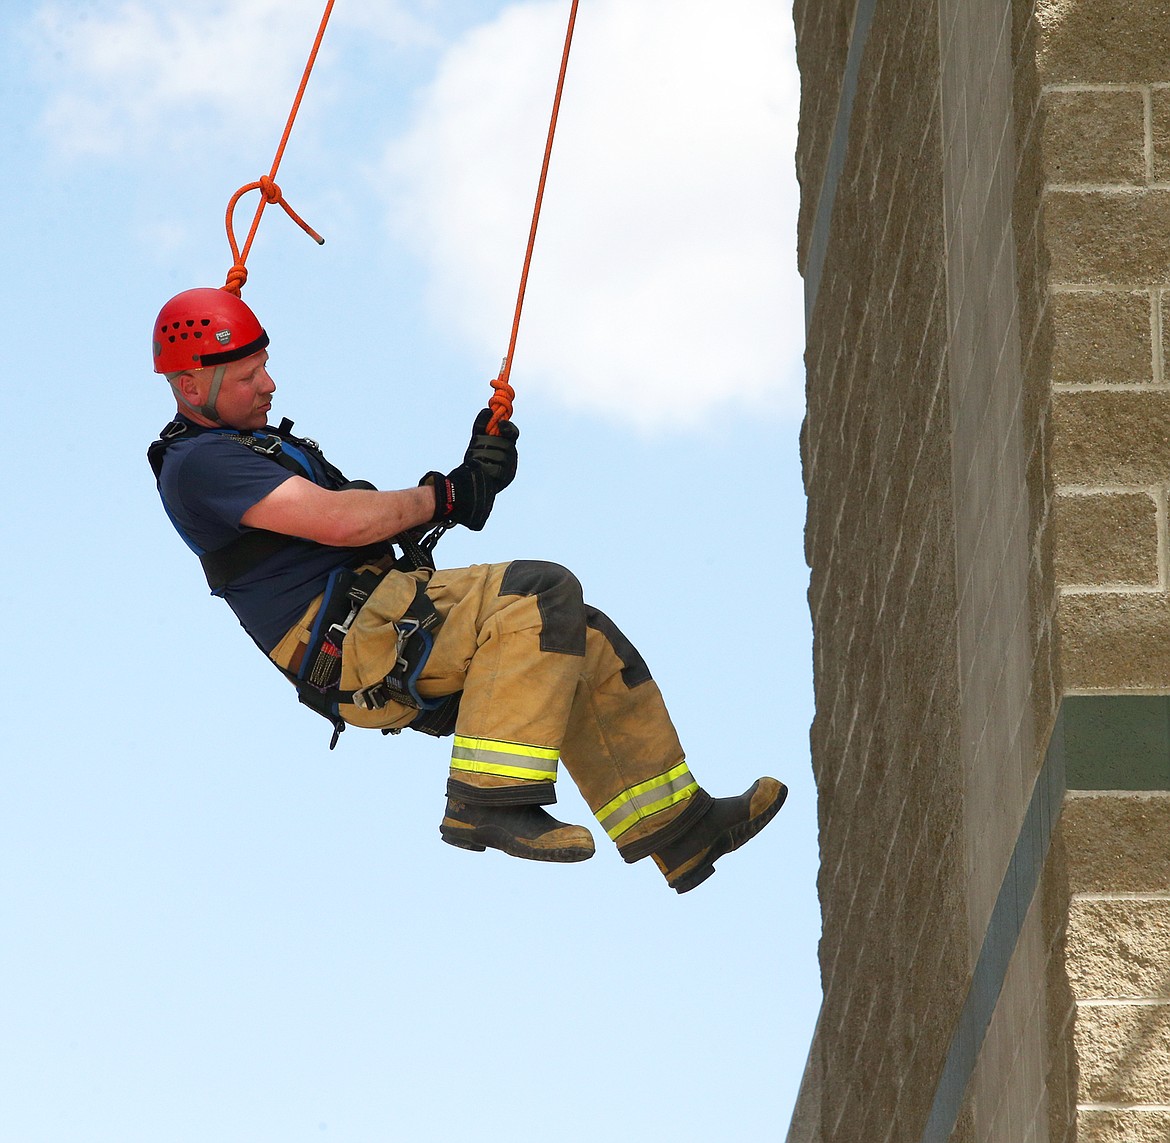 Matt Dilley, emergency vehicle technician with KCFR, rappels down a building on Tuesday during a training day at the KCFR Fire Training Center.